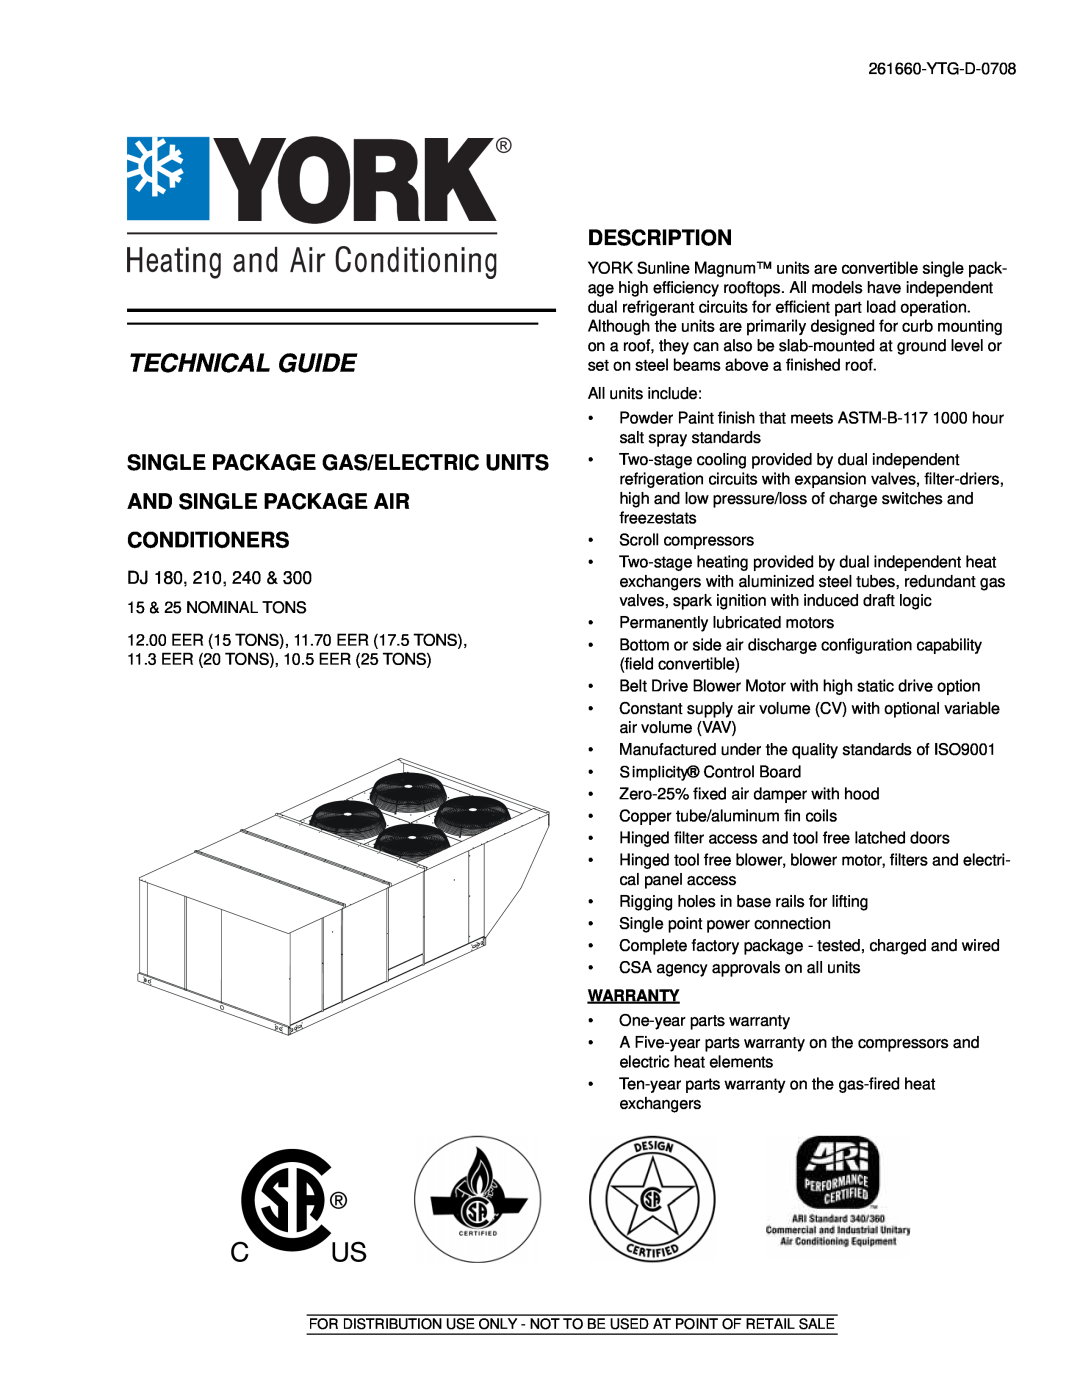 York DJ 240 warranty Single Package Gas/Electric Units, And Single Package Air Conditioners, Description, Technical Guide 